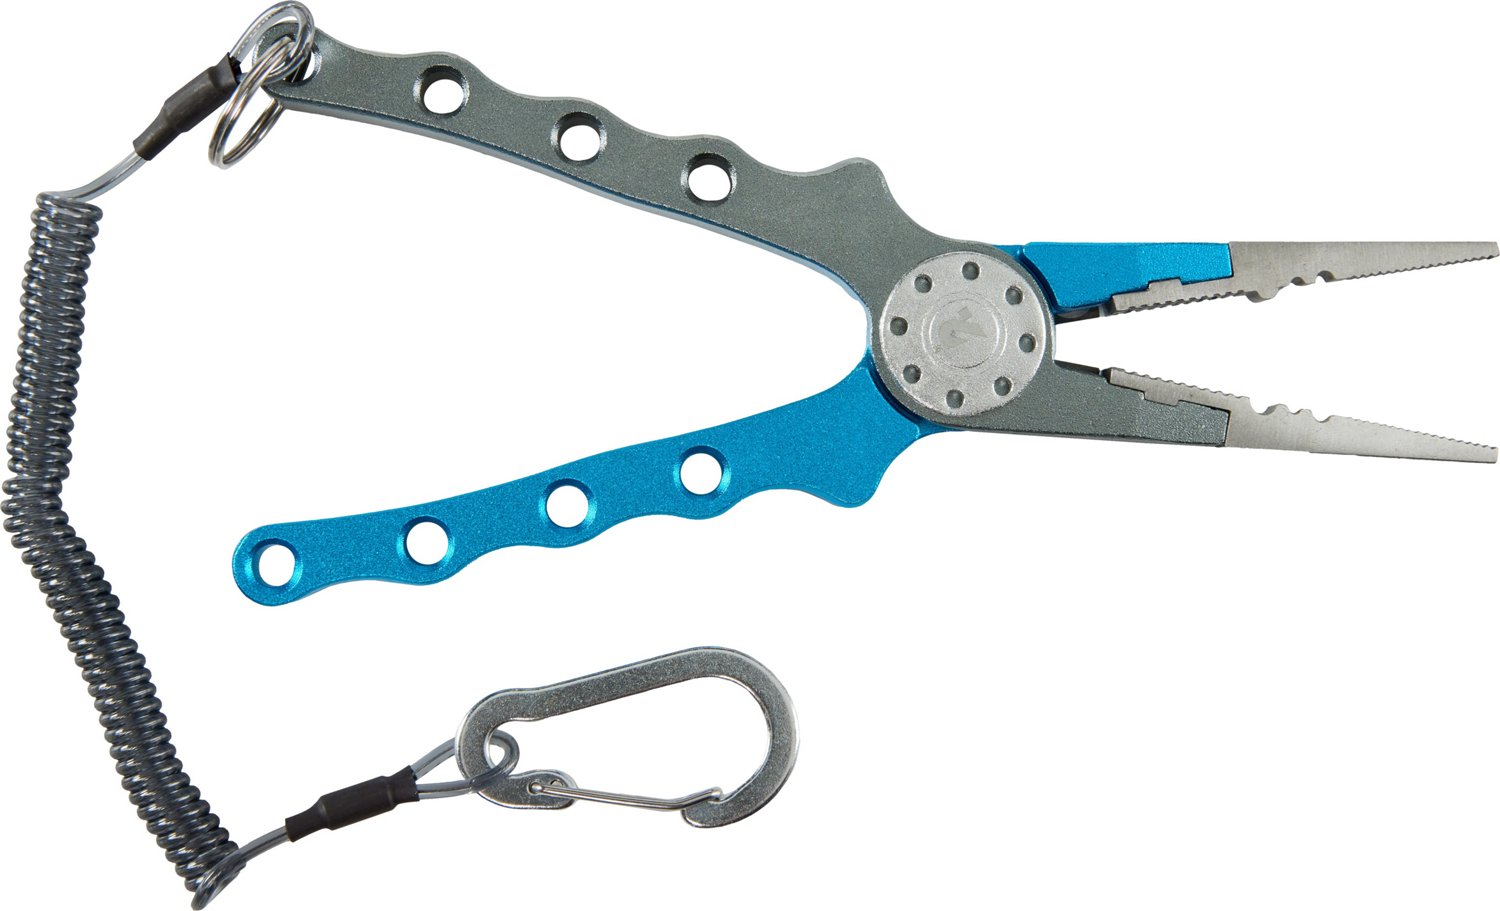 Fishing Pliers & Hook Removers